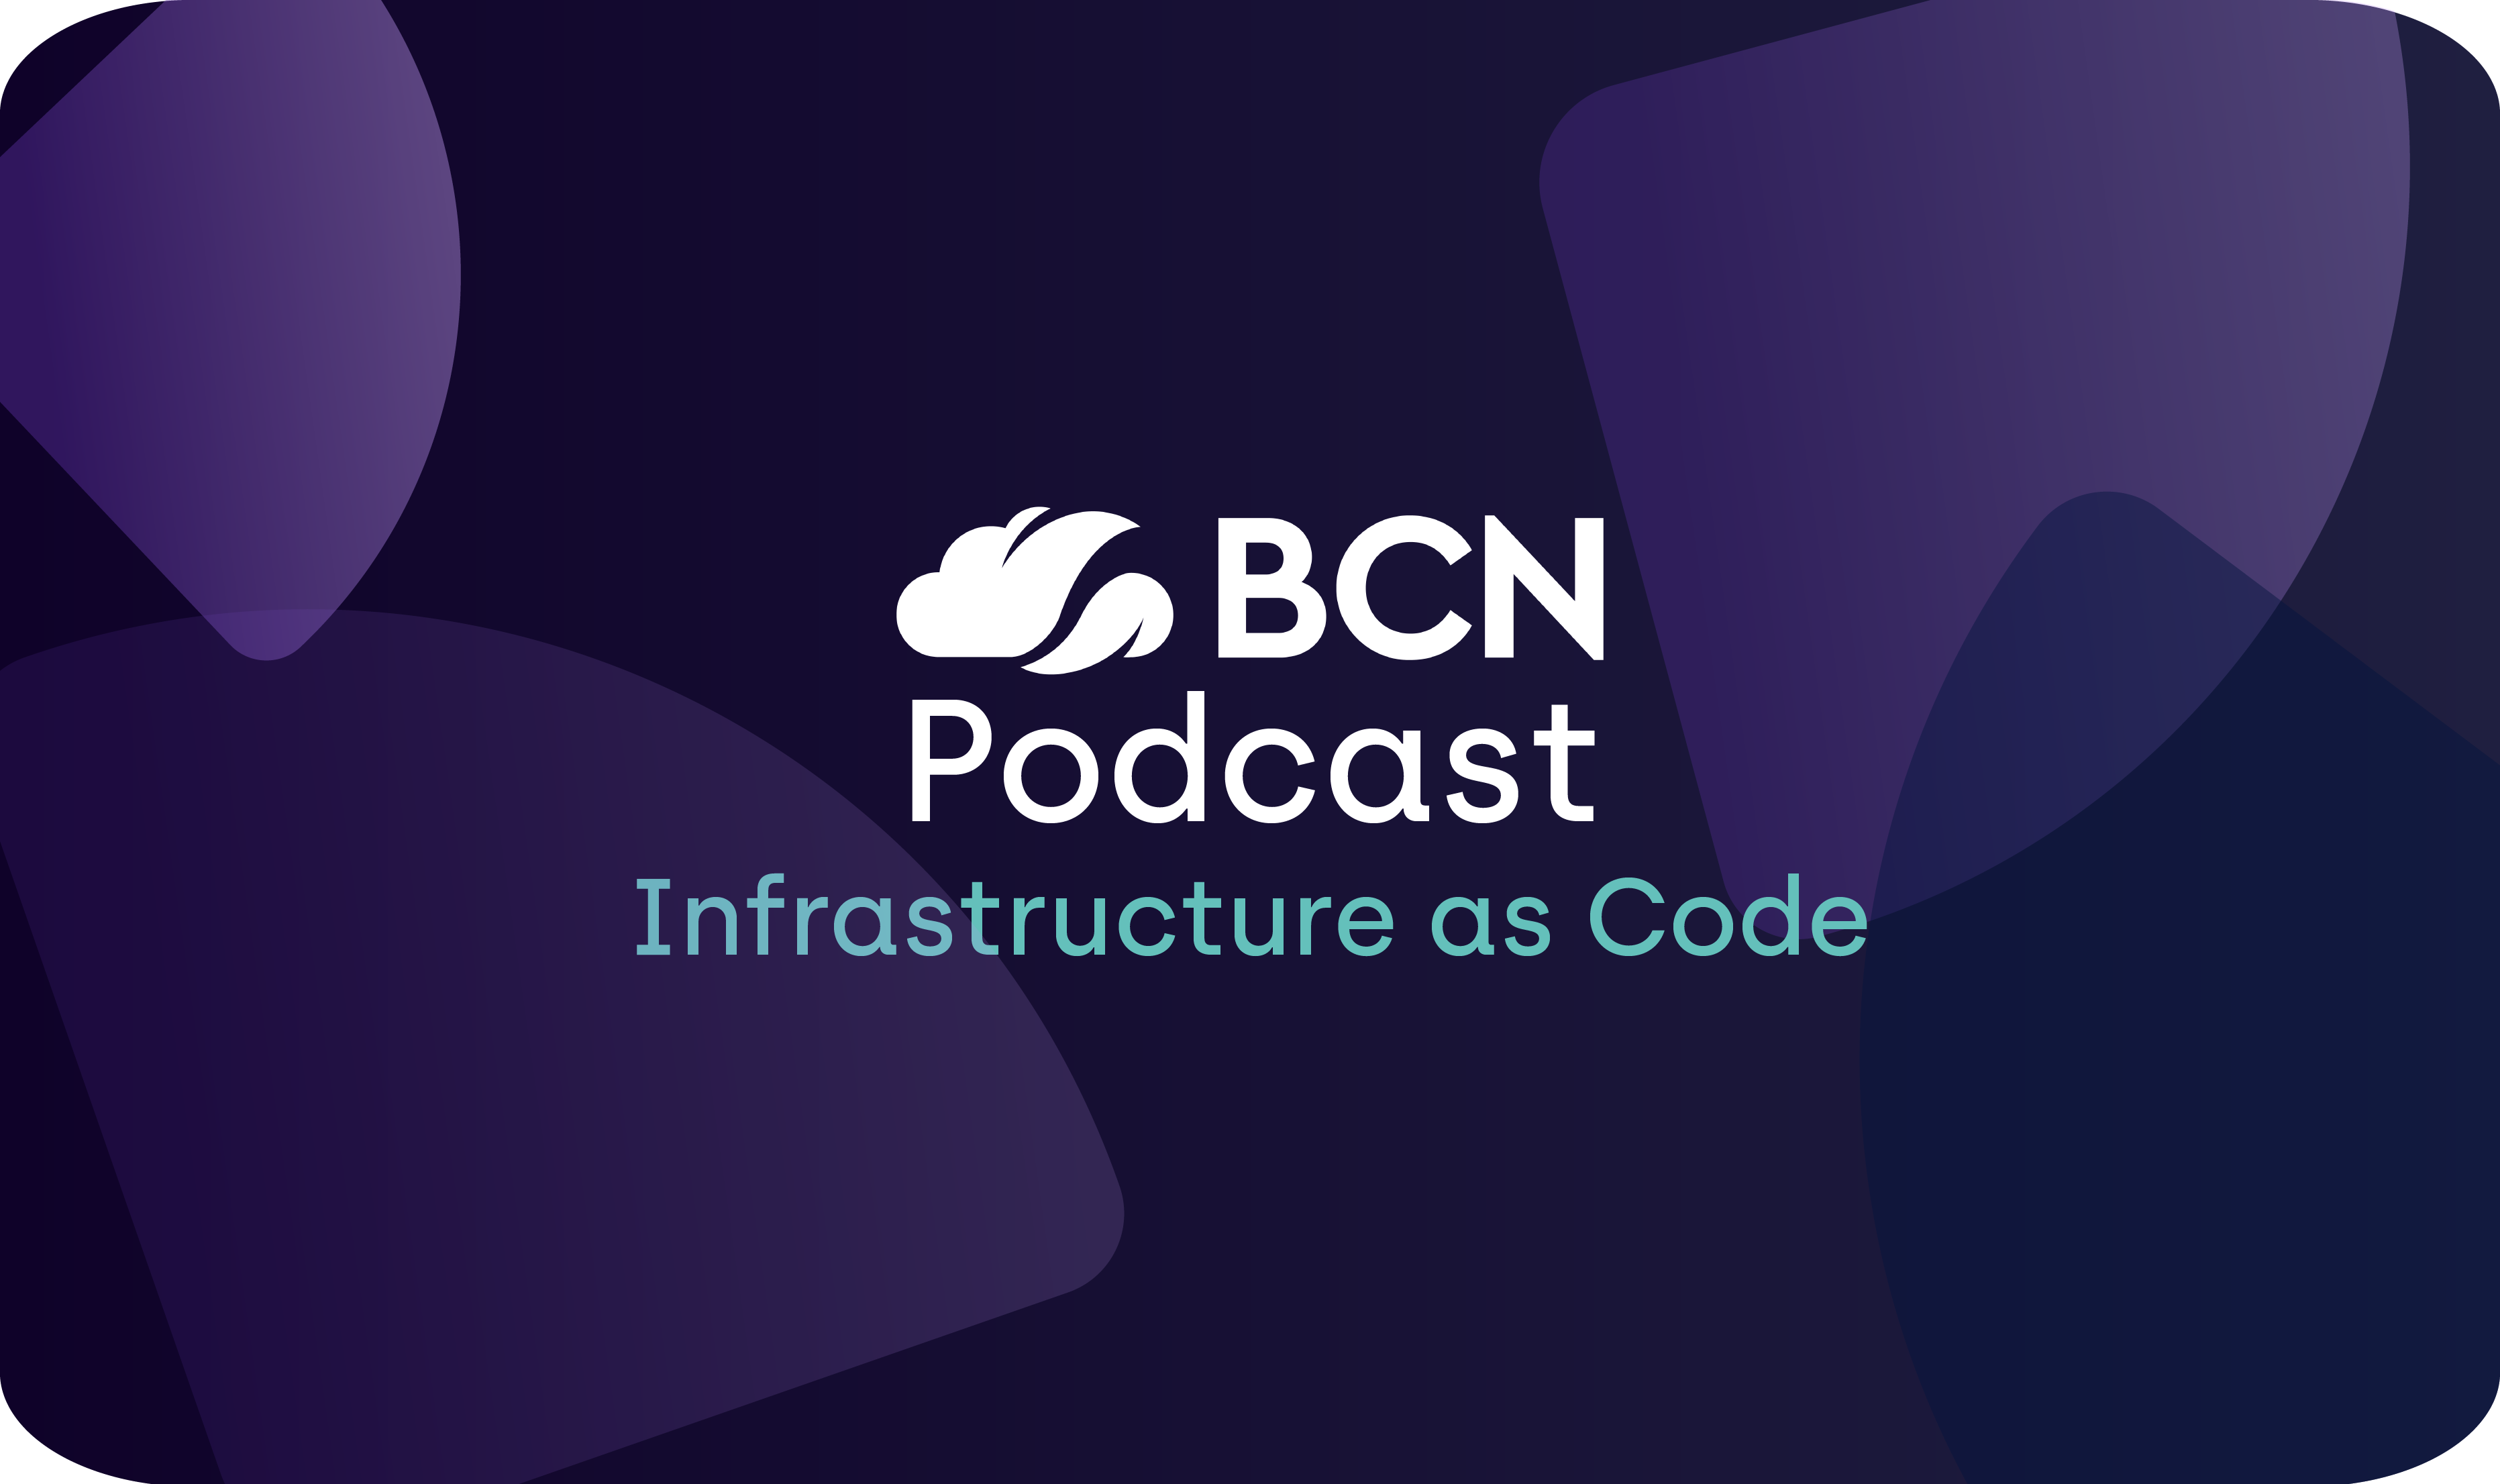 BCN Podcast: Benefits of Infrastructure as Code